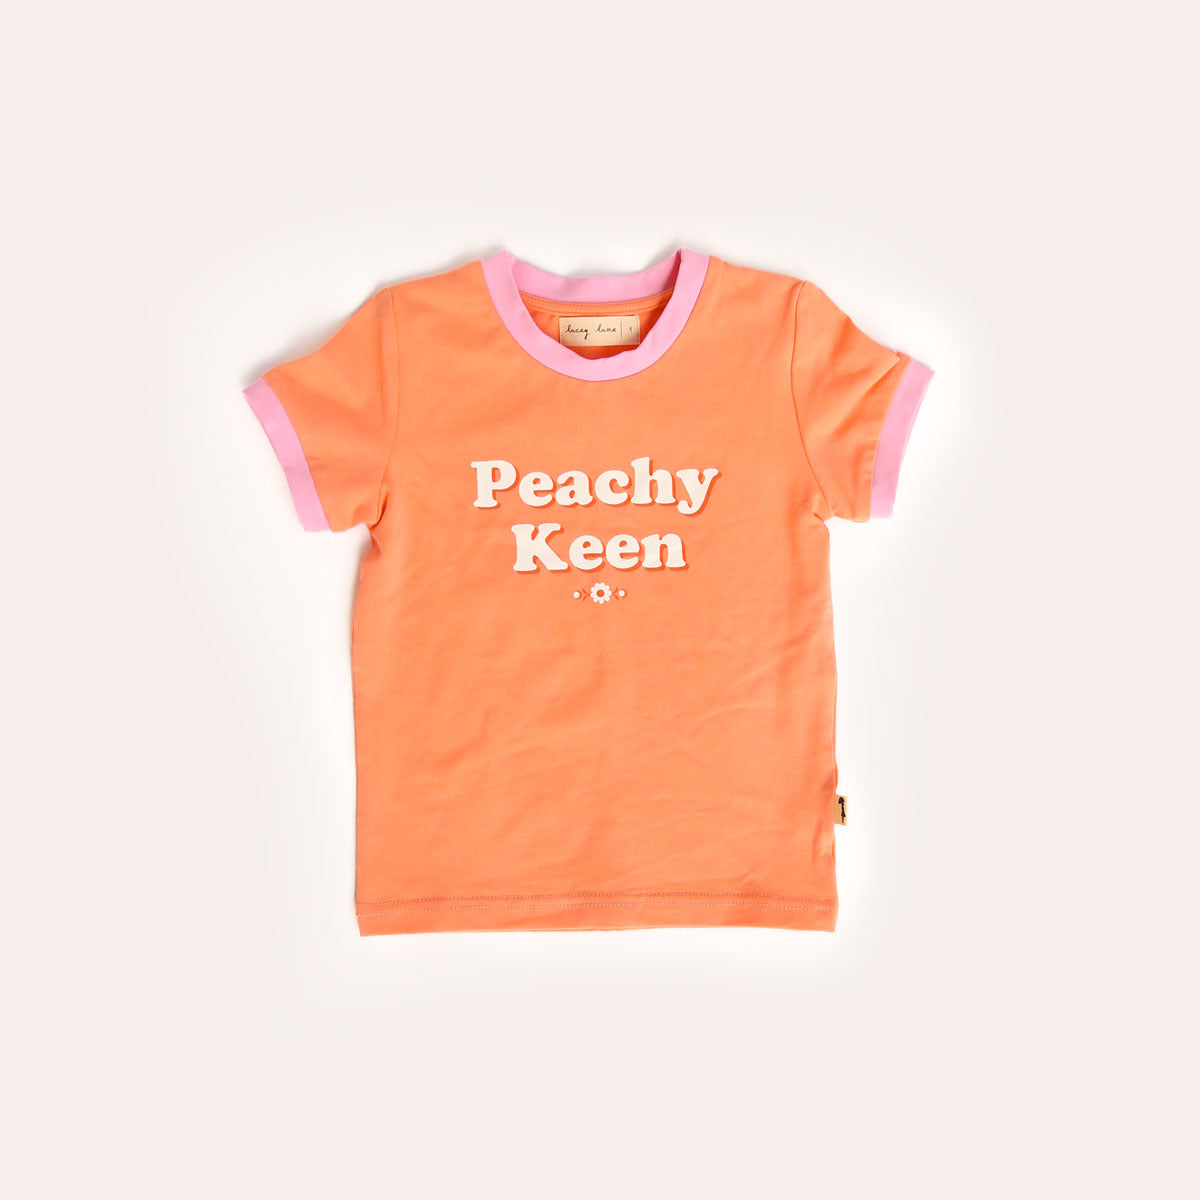 IMPERFECT - Peachy Tee